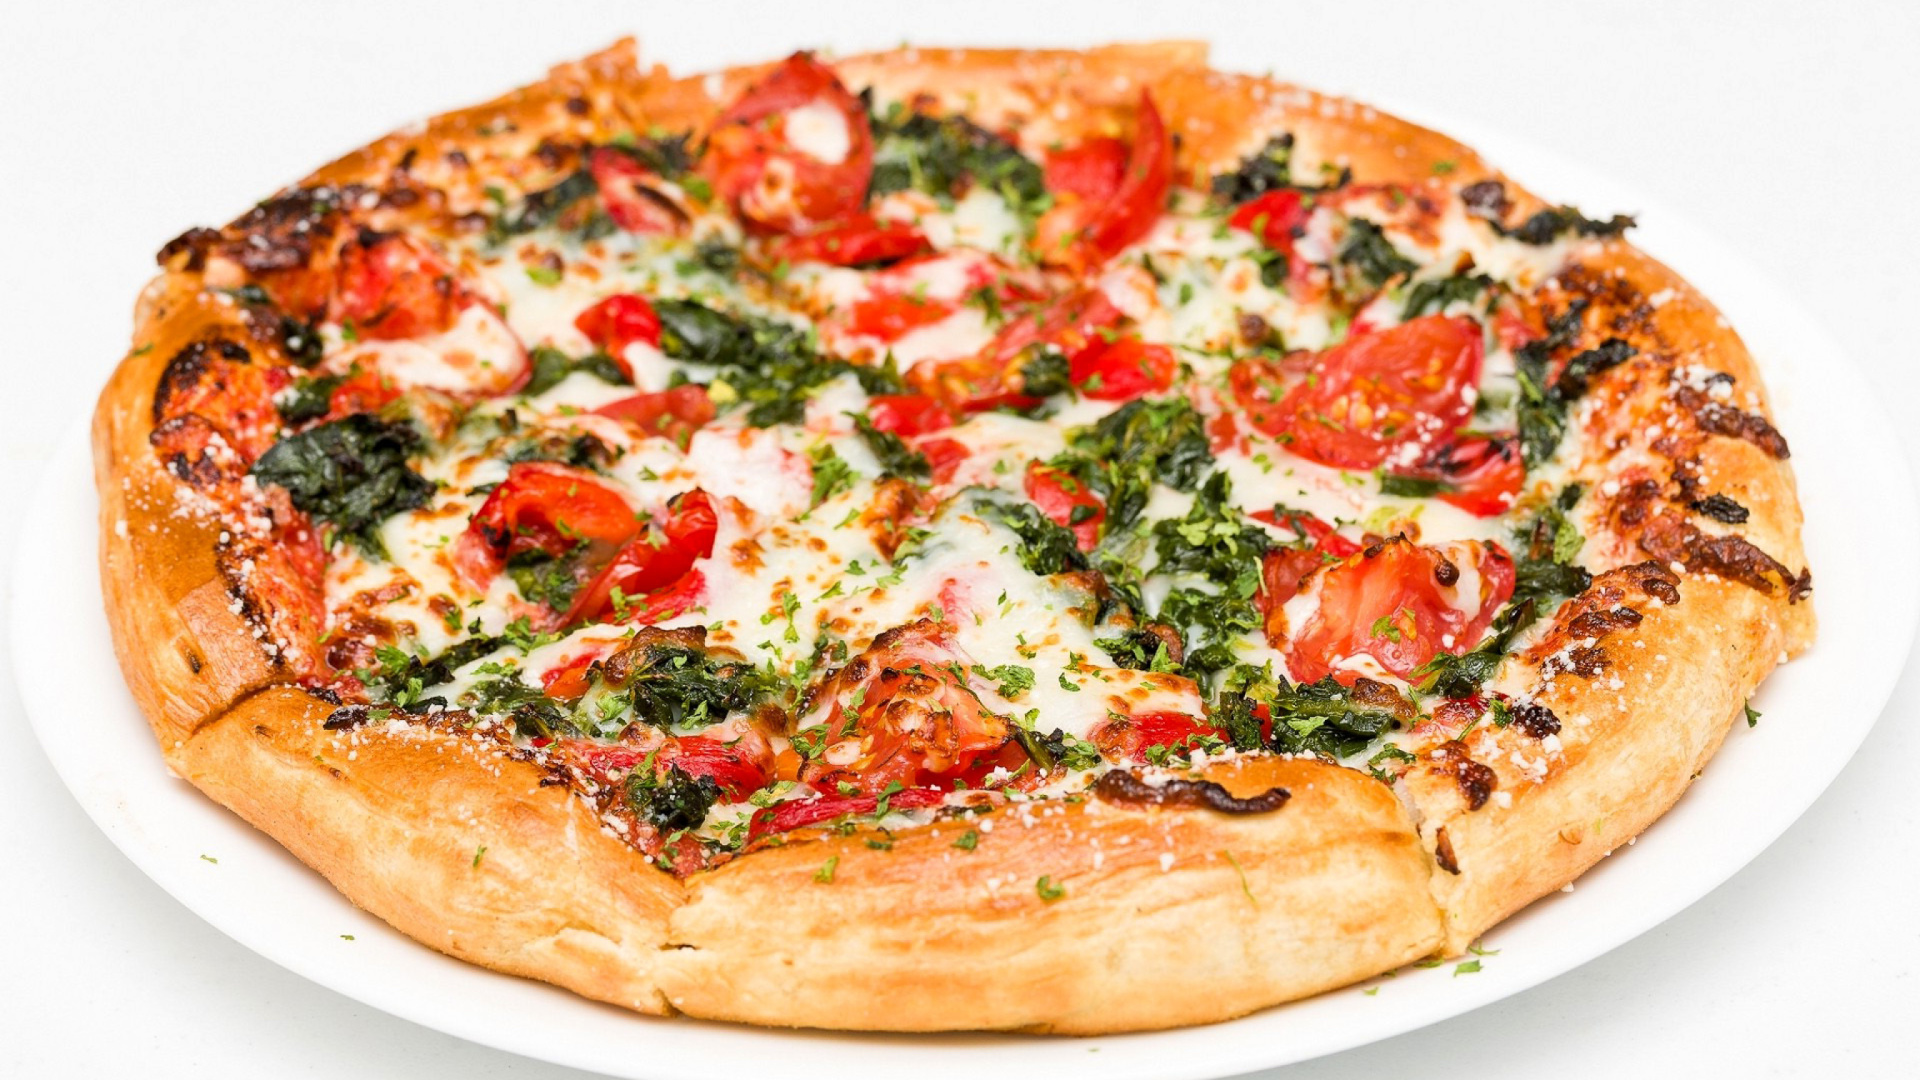 Pizza with spinach wallpaper 1920x1080